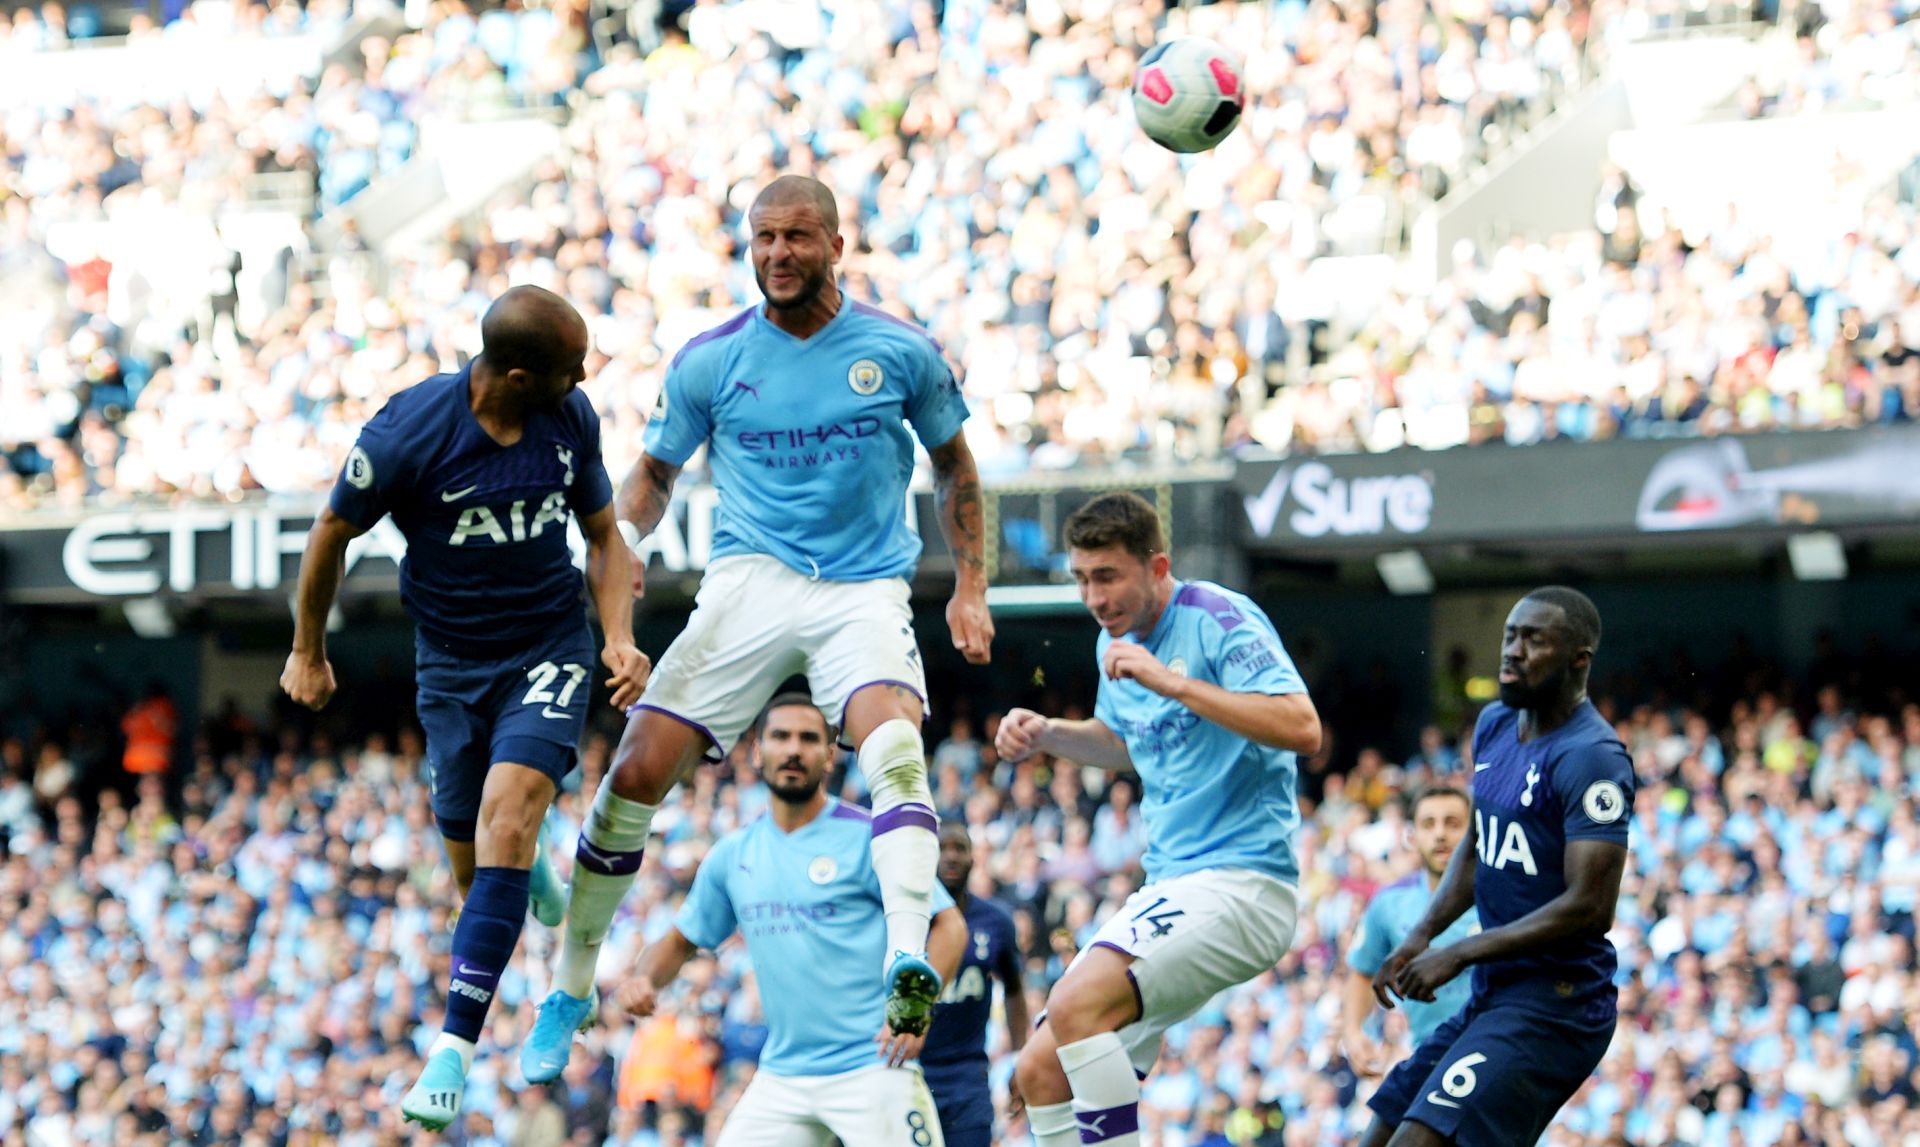 epa07778249 Tottenham Hotspur's Lucas Moura (L) scores a goal during the English Premier League soccer match between Manchester City and Tottenham Hotspurs at the Etihad Stadium in Manchester, Britain, 17 August 2019.  EPA/PETER POWELL EDITORIAL USE ONLY.  No use with unauthorized audio, video, data, fixture lists, club/league logos or 'live' services. Online in-match use limited to 120 images, no video emulation. No use in betting, games or single club/league/player publications.